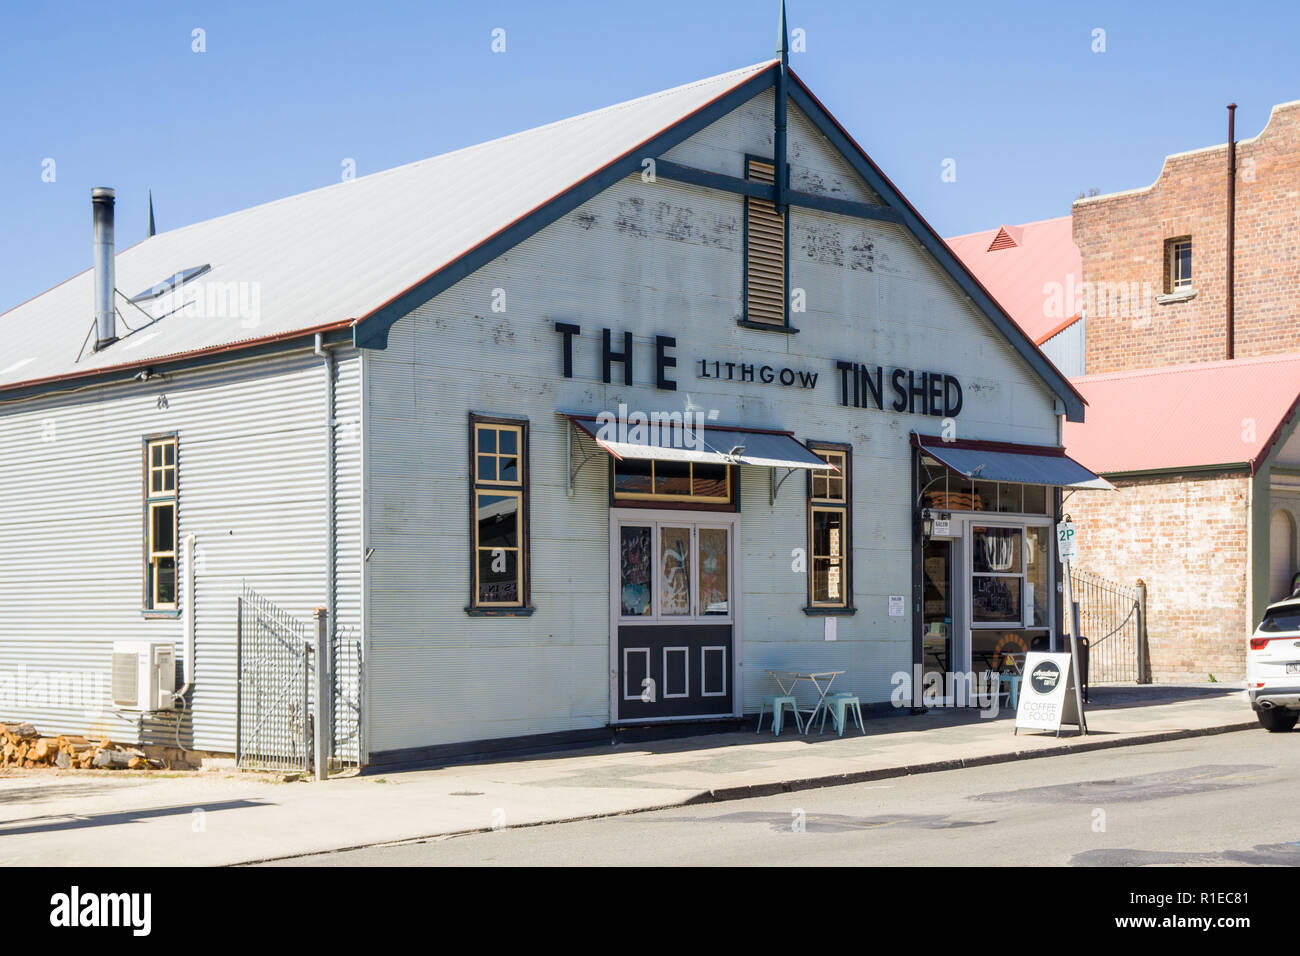 The Tin Shed Cafe in Lithgow, NSW, Australia Stock Photo